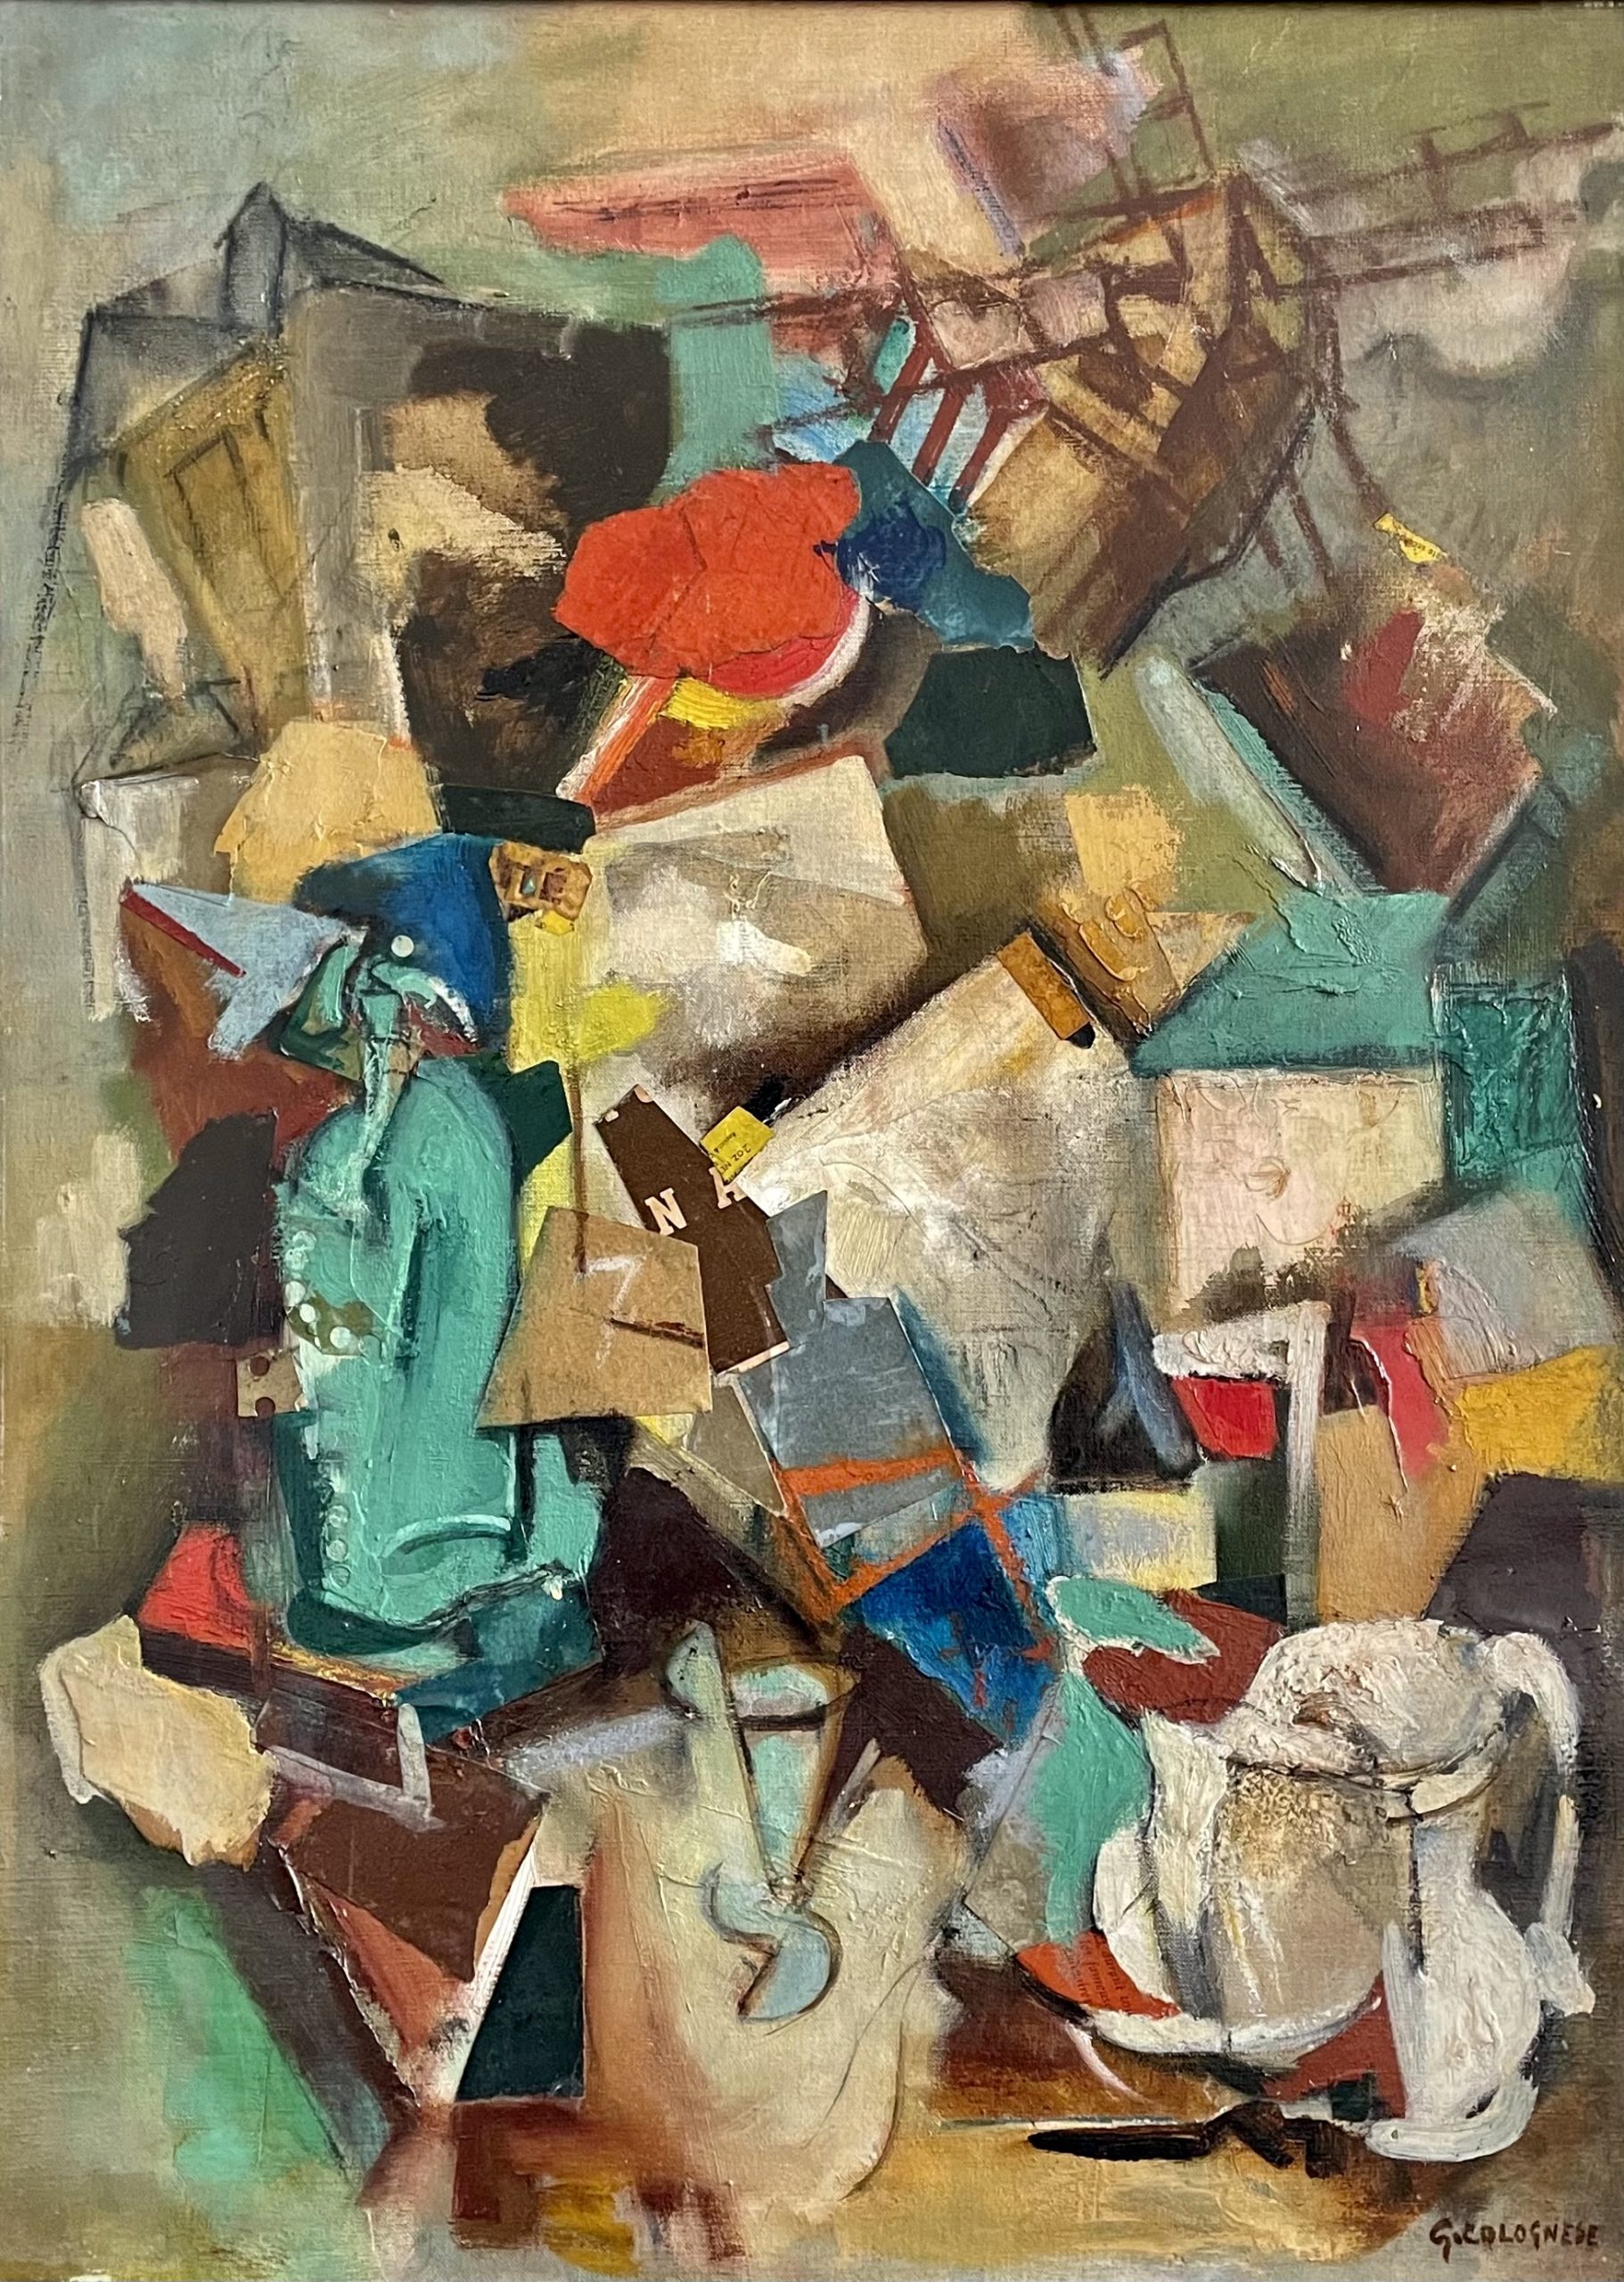 Giovanni Colognese (1901 - 1994), oil on canvas, 46 x 60 cm